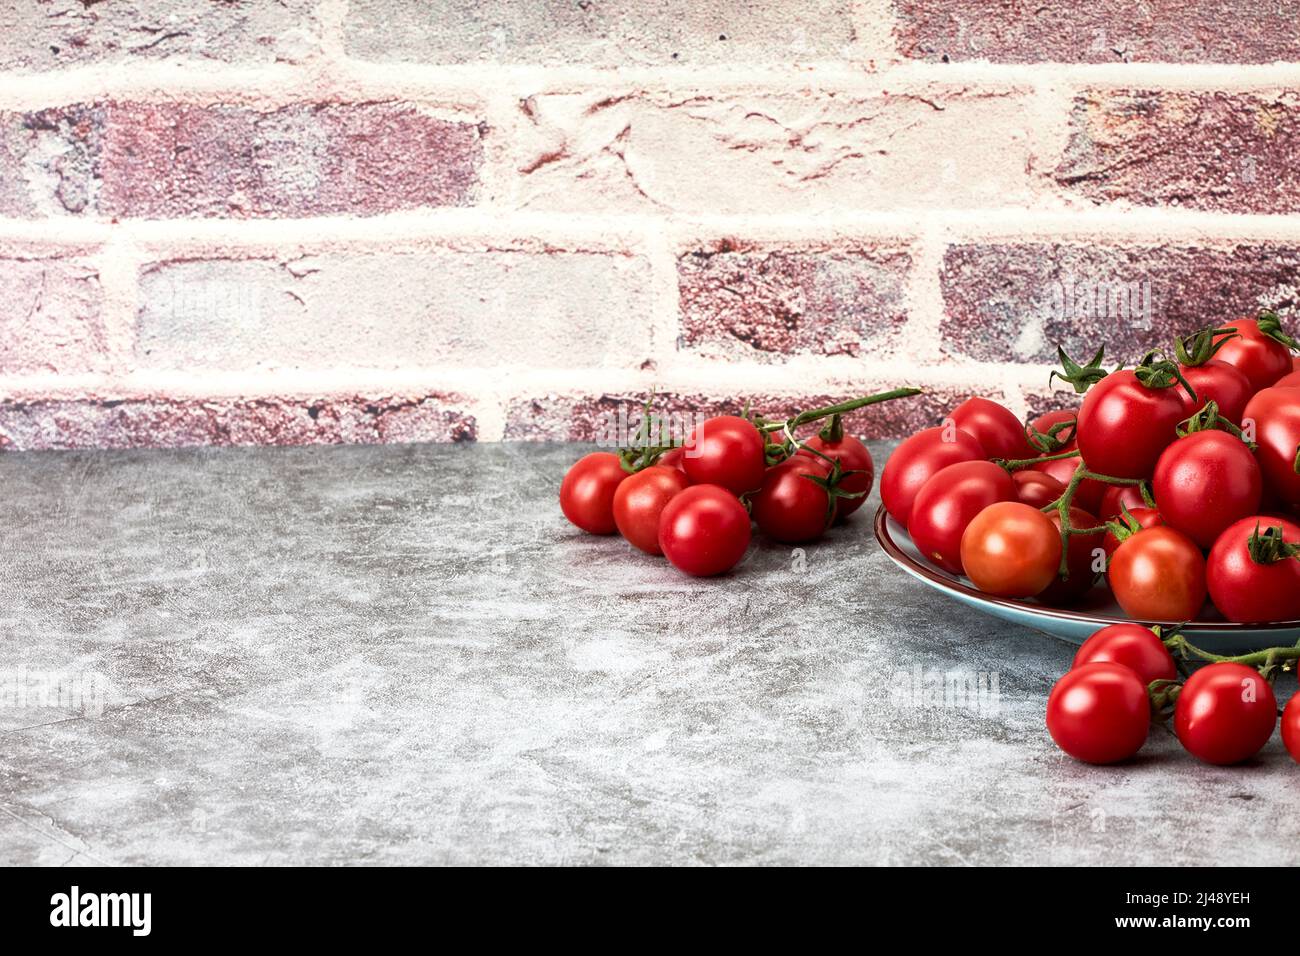 Composition of ripe cherry tomatoes on a plate on a stone countertop. Healthy food. Vegan food. Vegetarian food Stock Photo